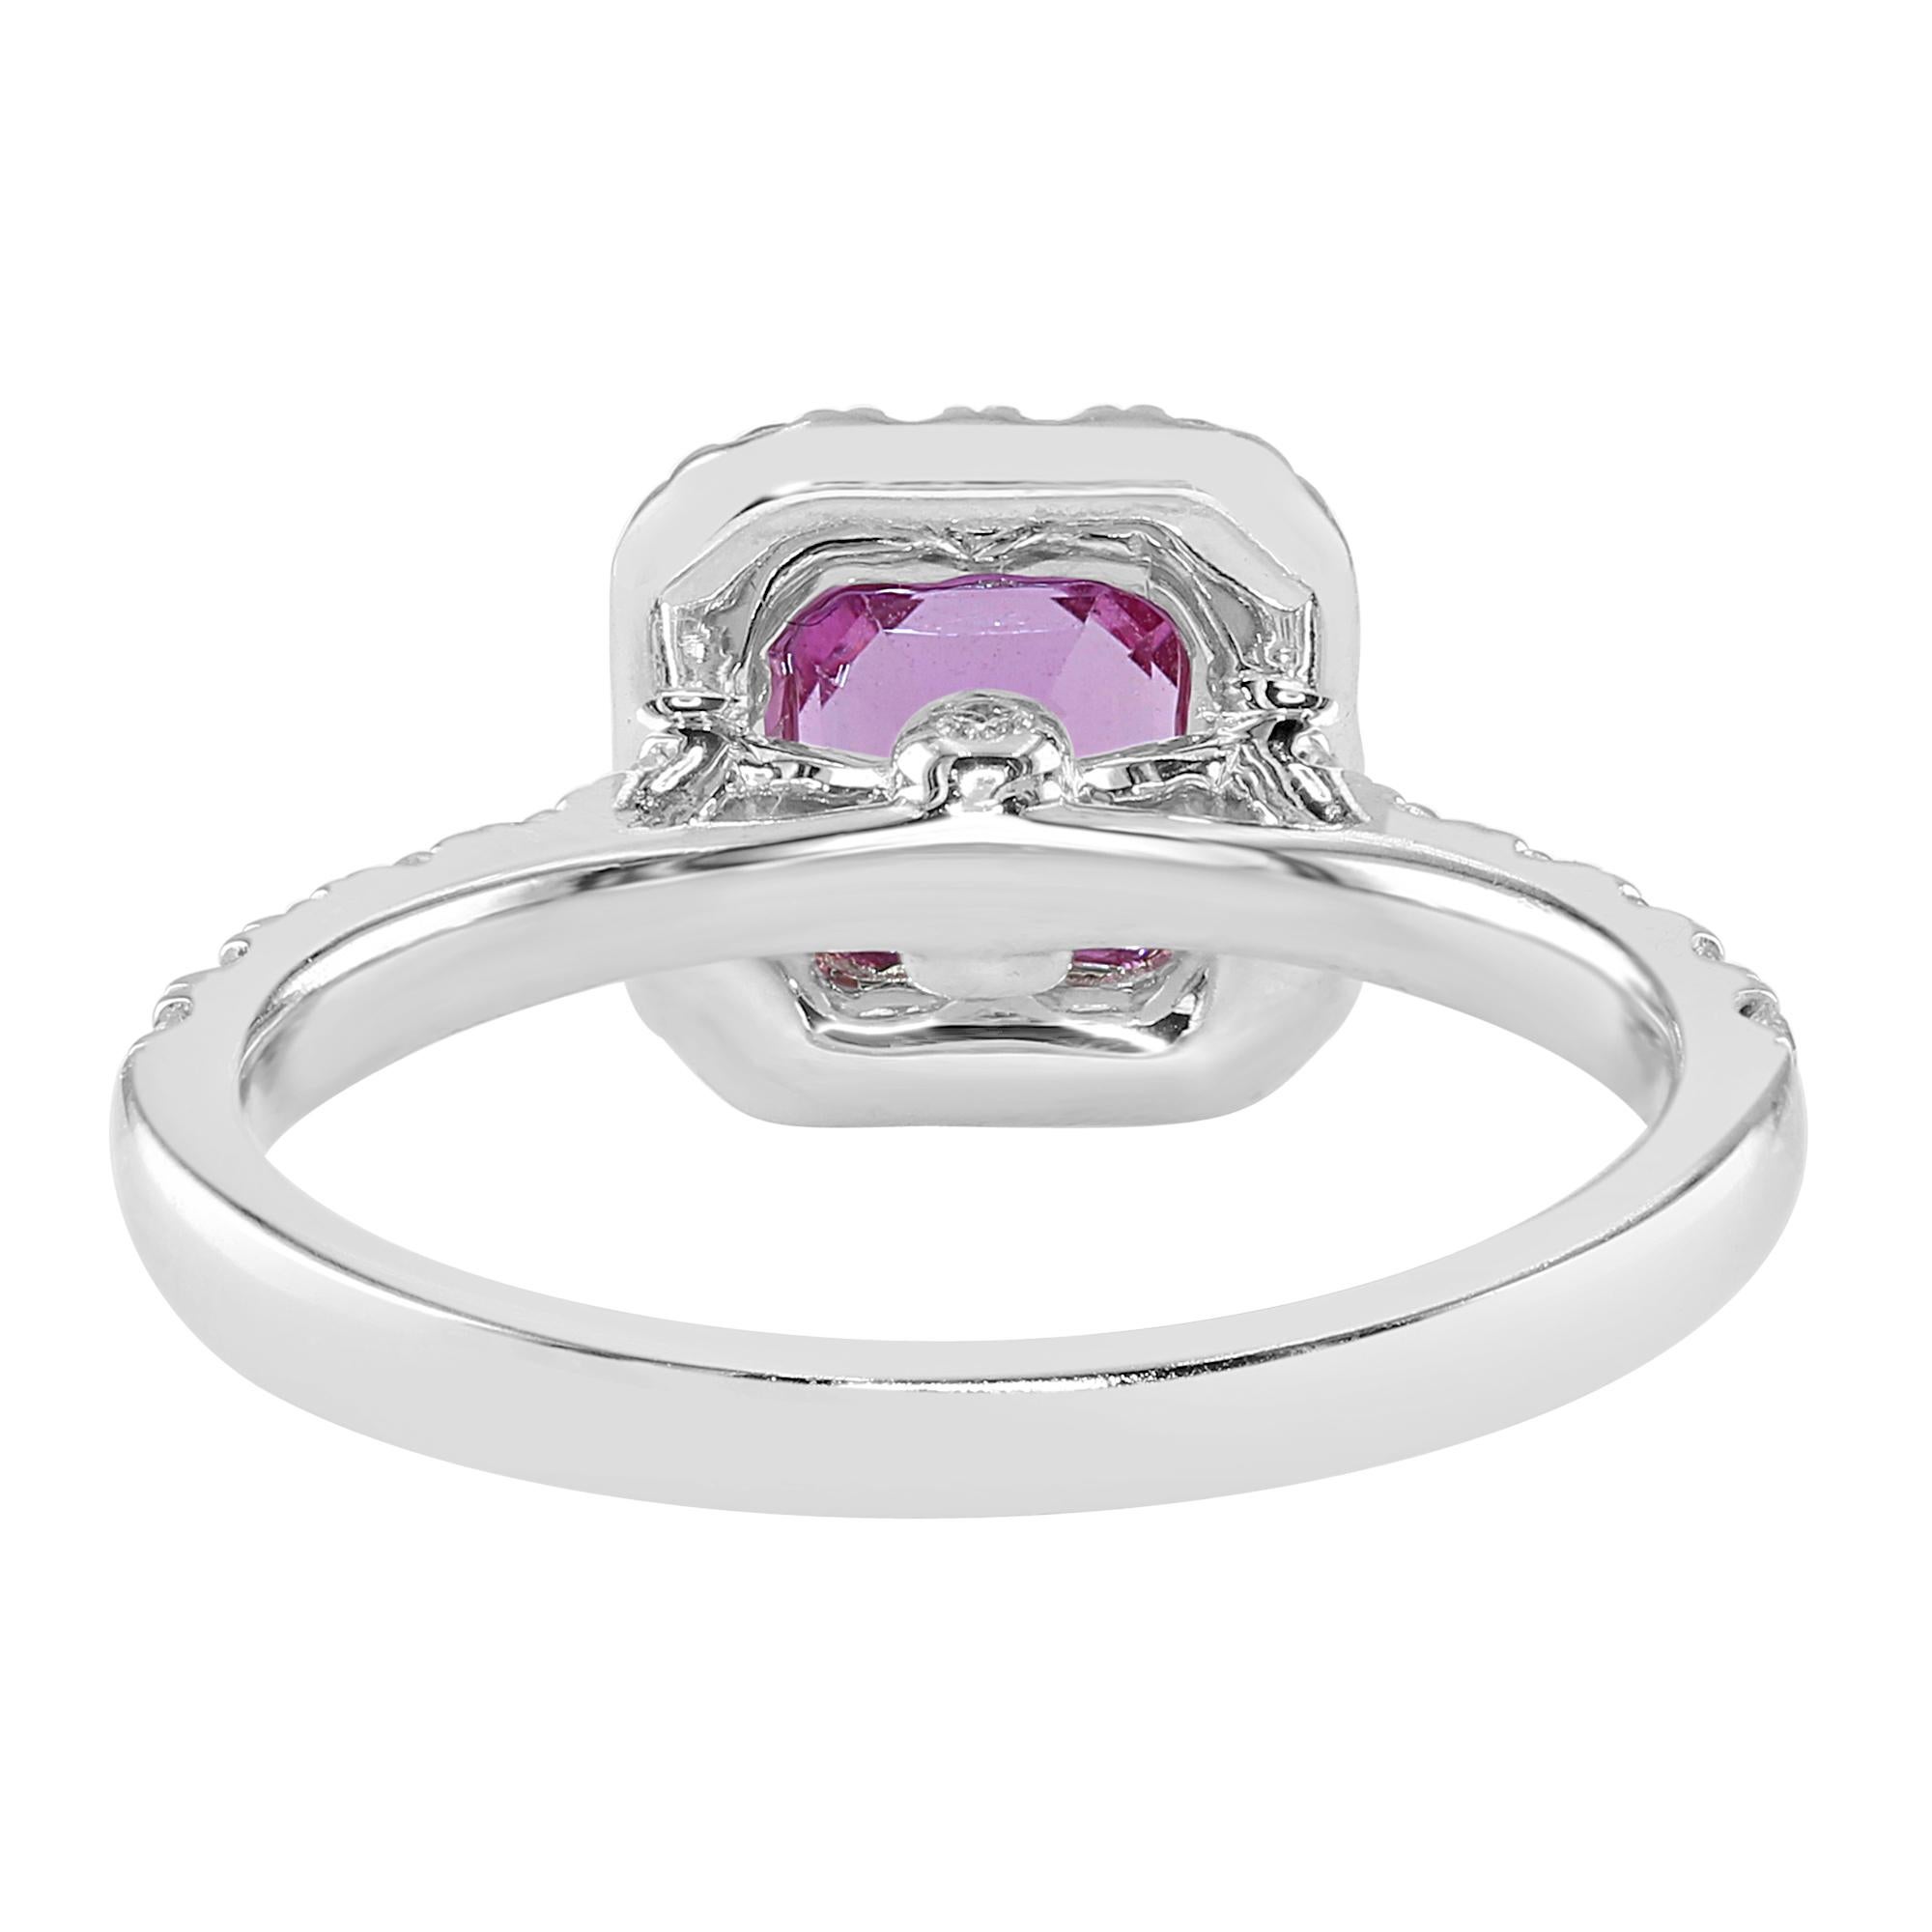 Emerald Cut 1.23 Carat Pink Sapphire and Diamond Cocktail Ring Set in 18 Karat For Sale